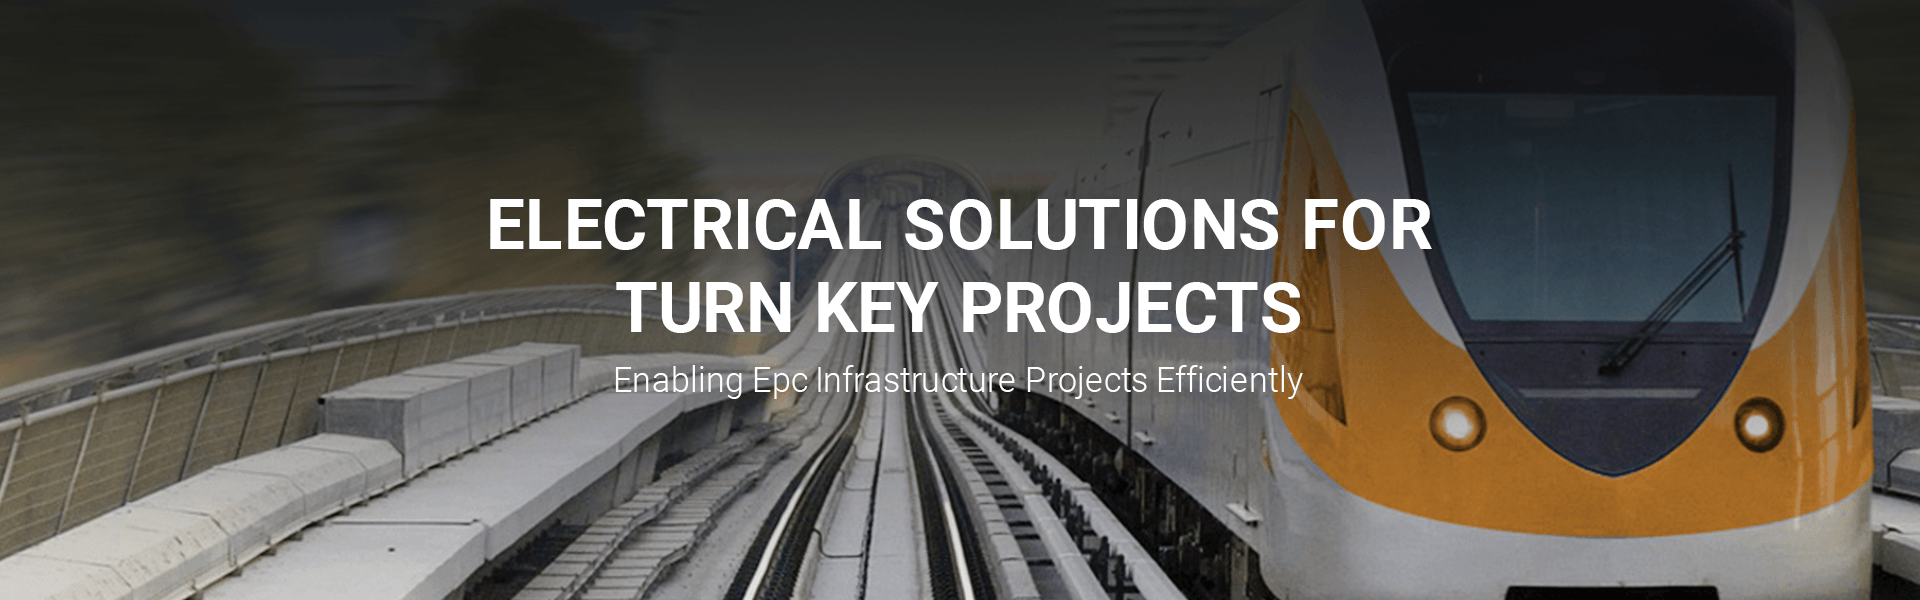 Polycab epc enabling epc infrastructure projects efficiently